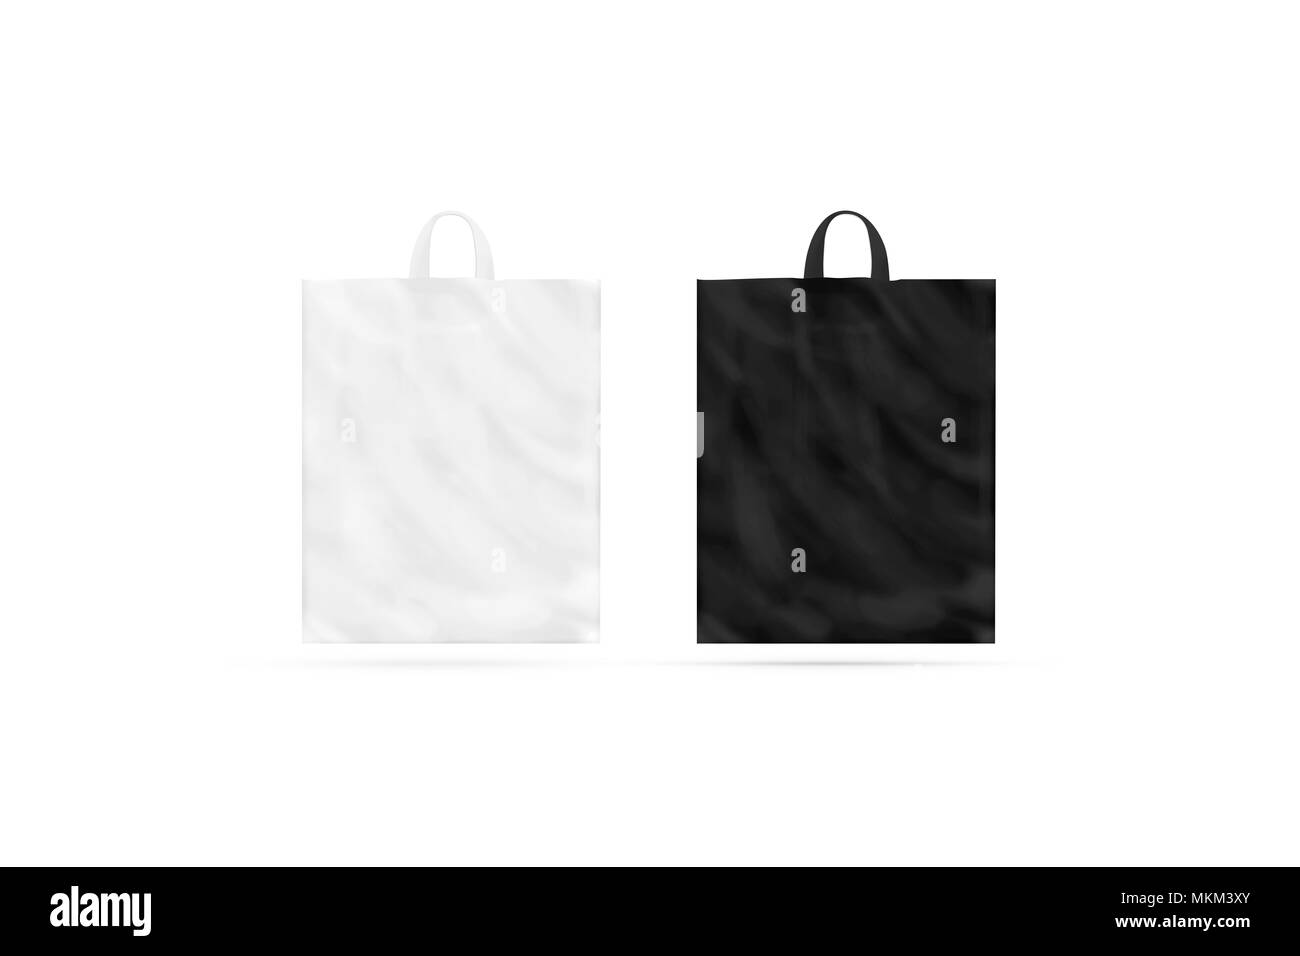 Blank white die-cut small plastic bag with handle hole mockup Stock Photo -  Alamy